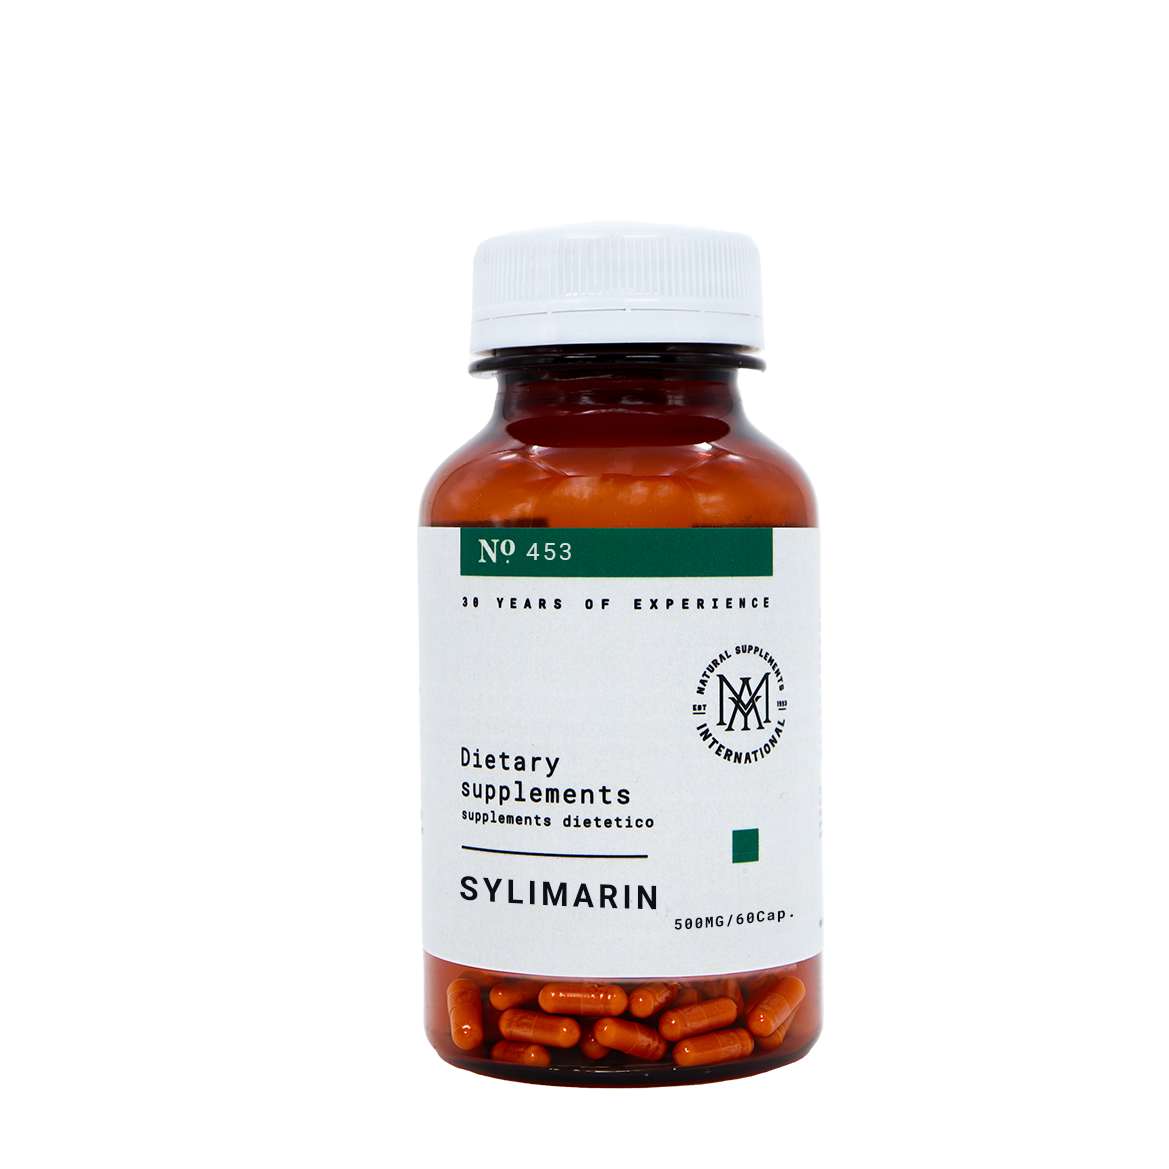 SYLIMARIN | No. 453